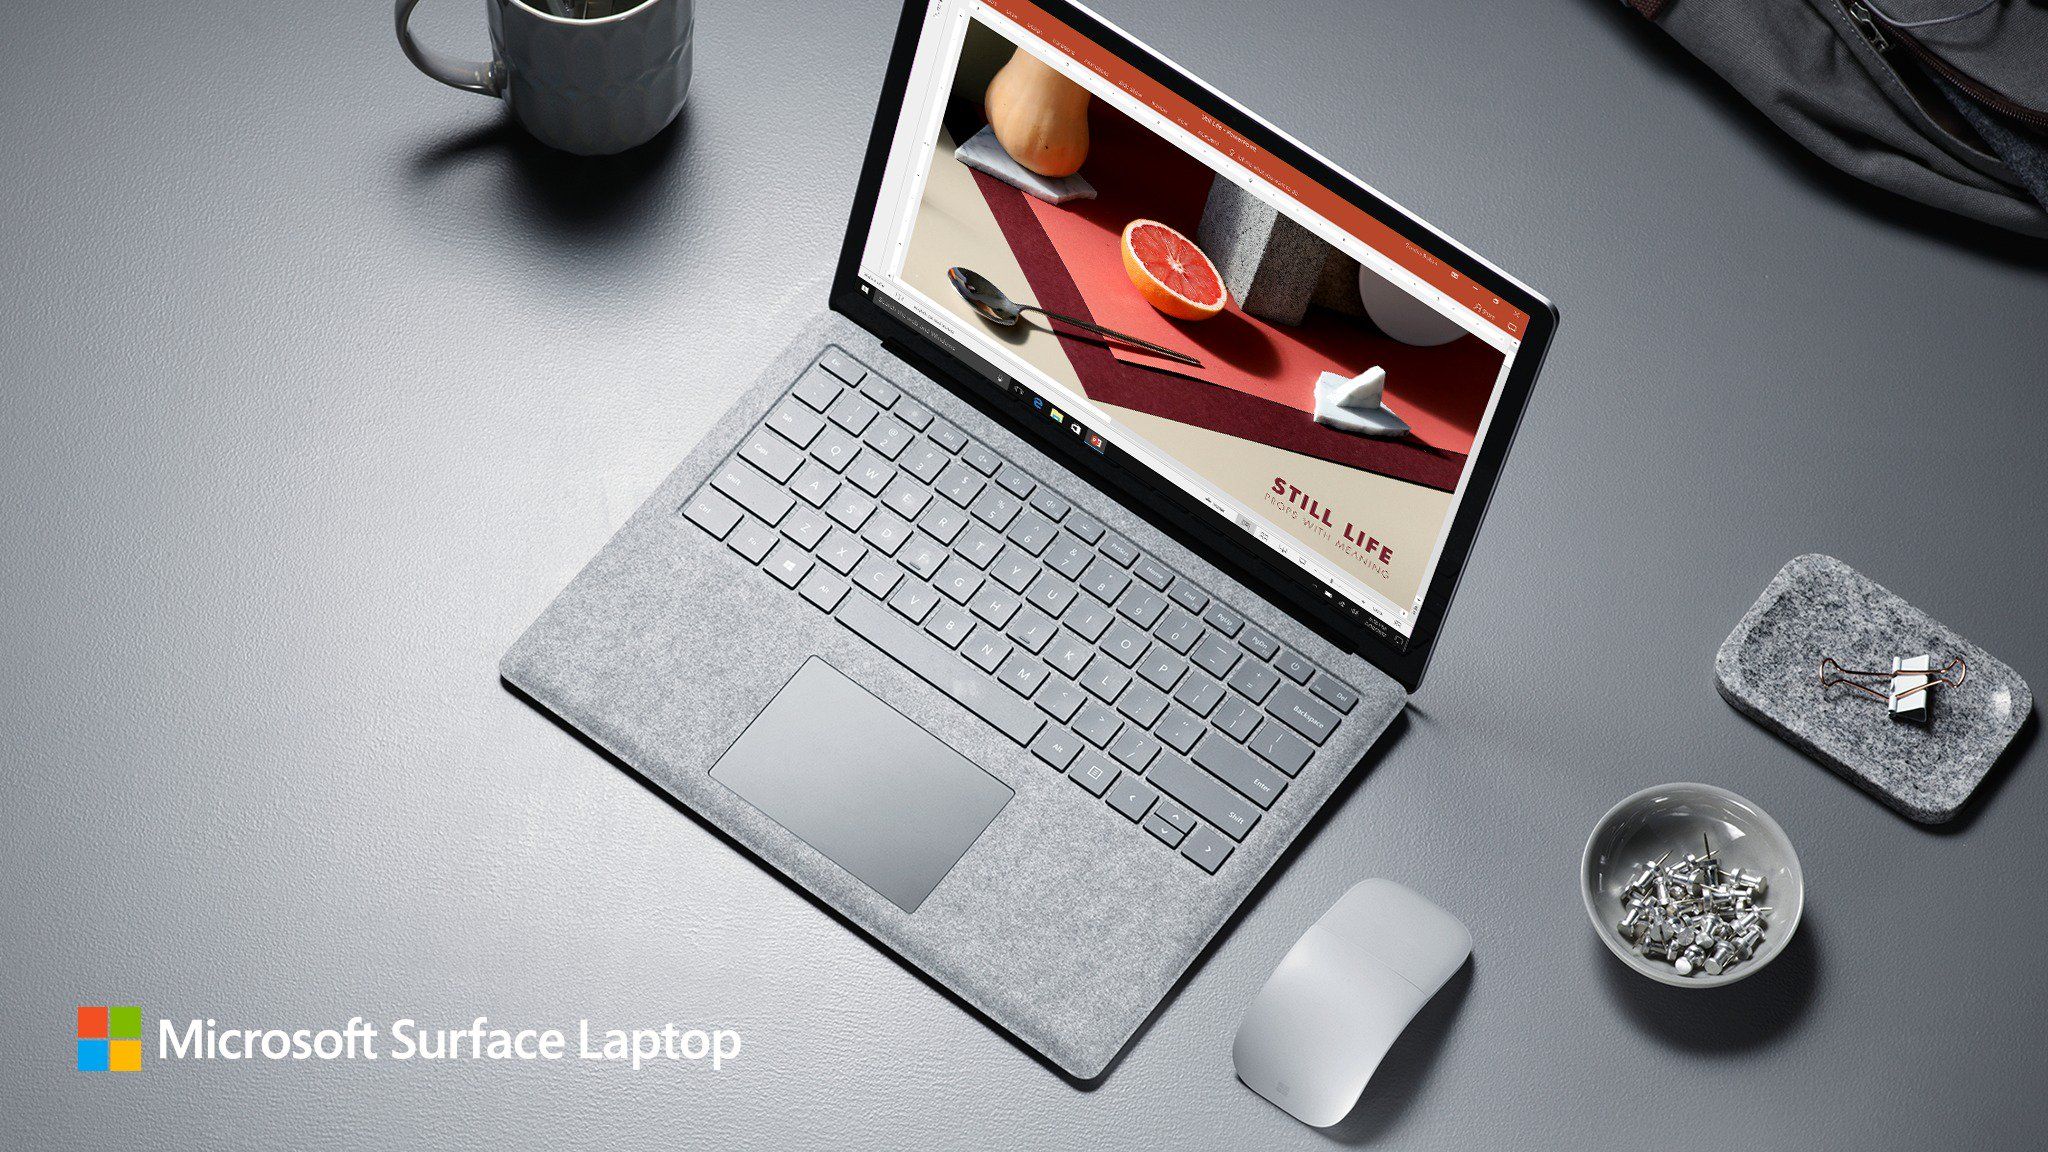 microsoft unveils the surface laptop a windows 10 s device looking to take down the macbook image 1